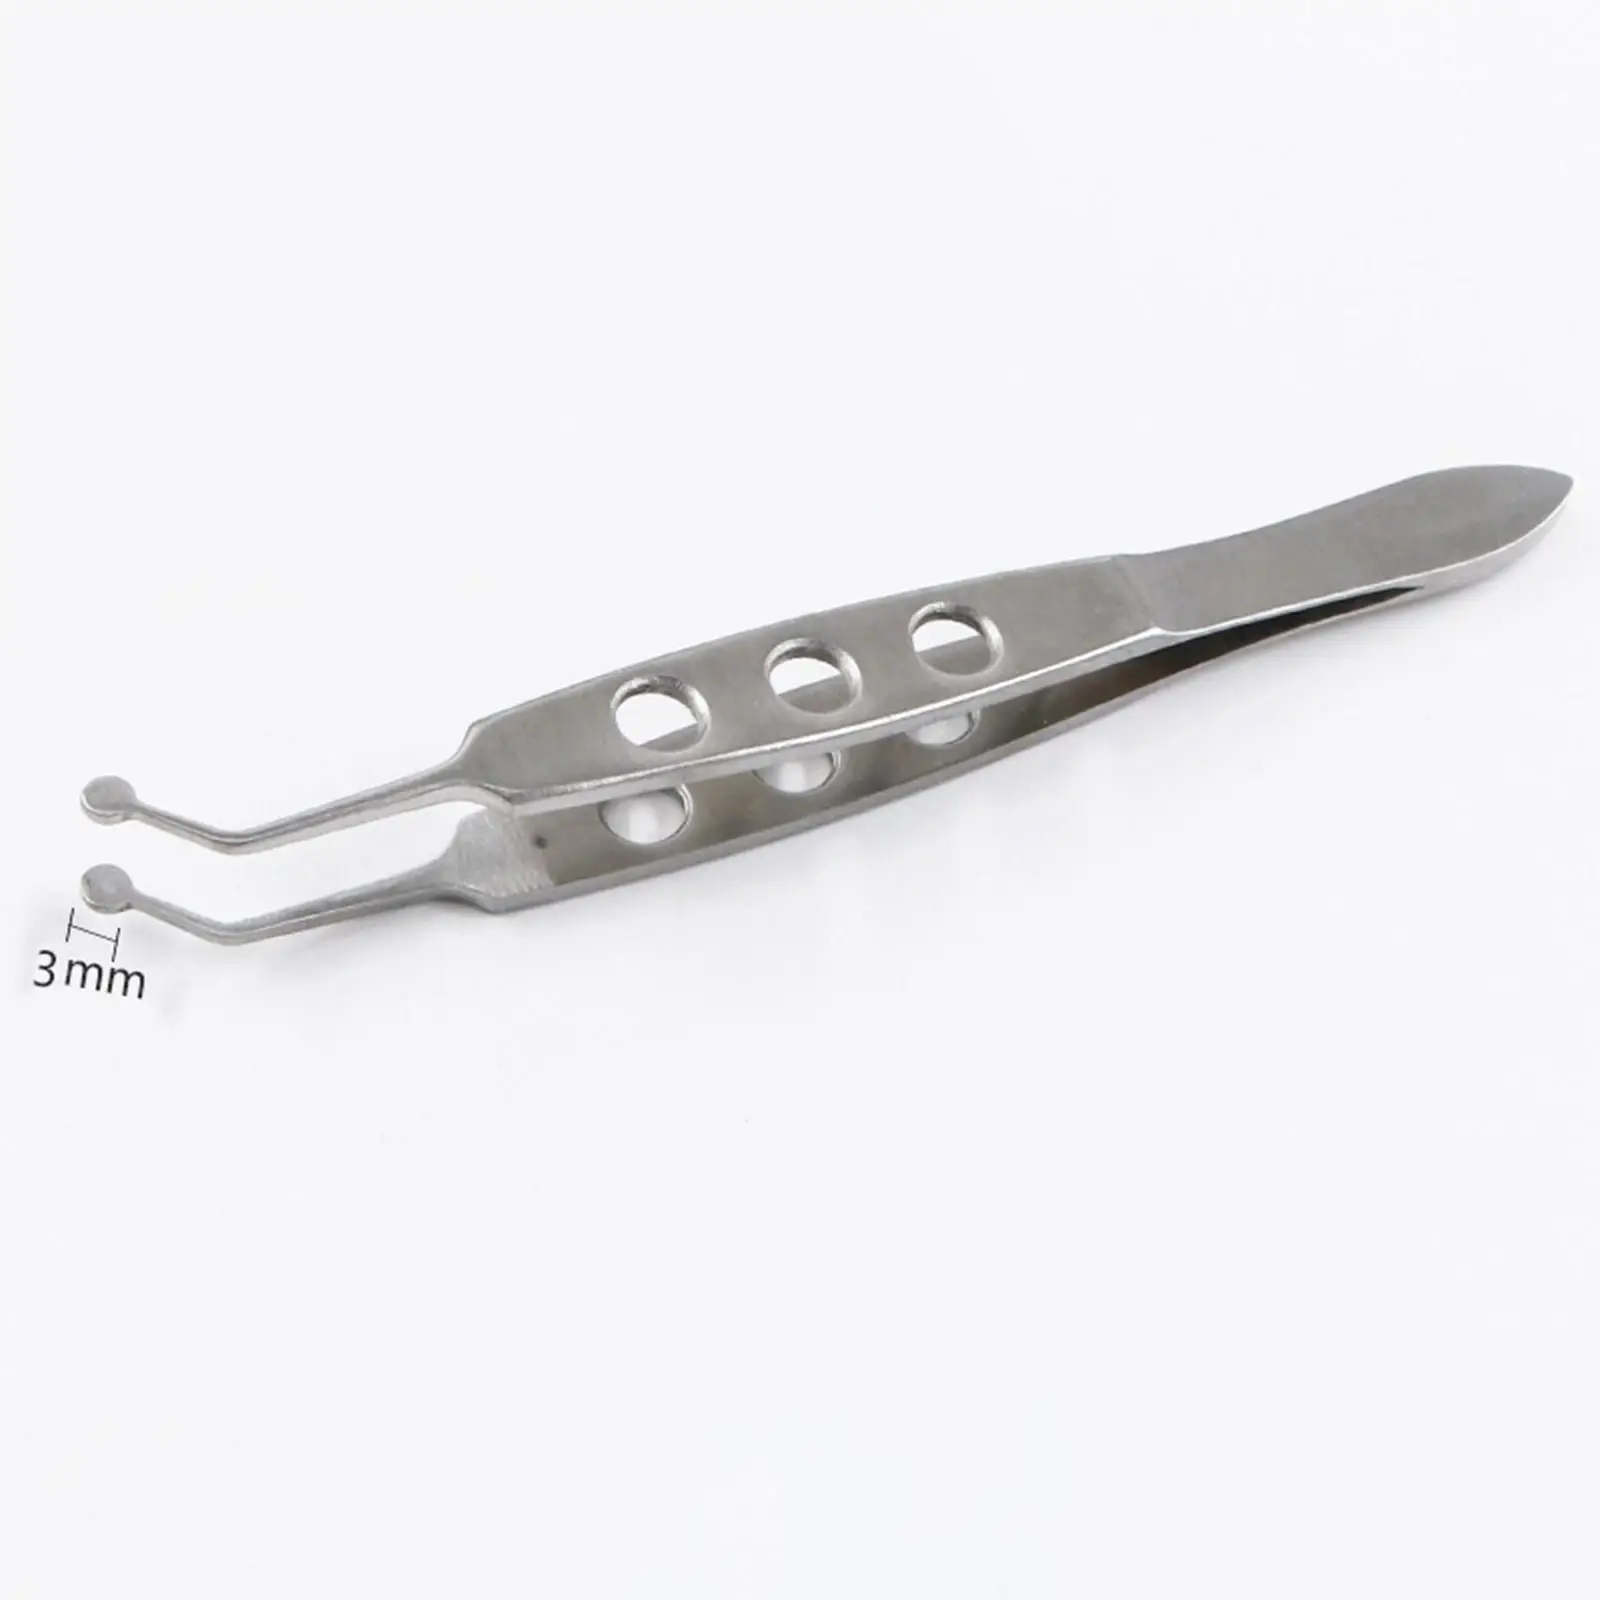 Meibomian Gland Expressor Forceps Eye Tool Stainless Steel Ophthalmological High Precision Clamp Tools Clip for Meibomian Flap